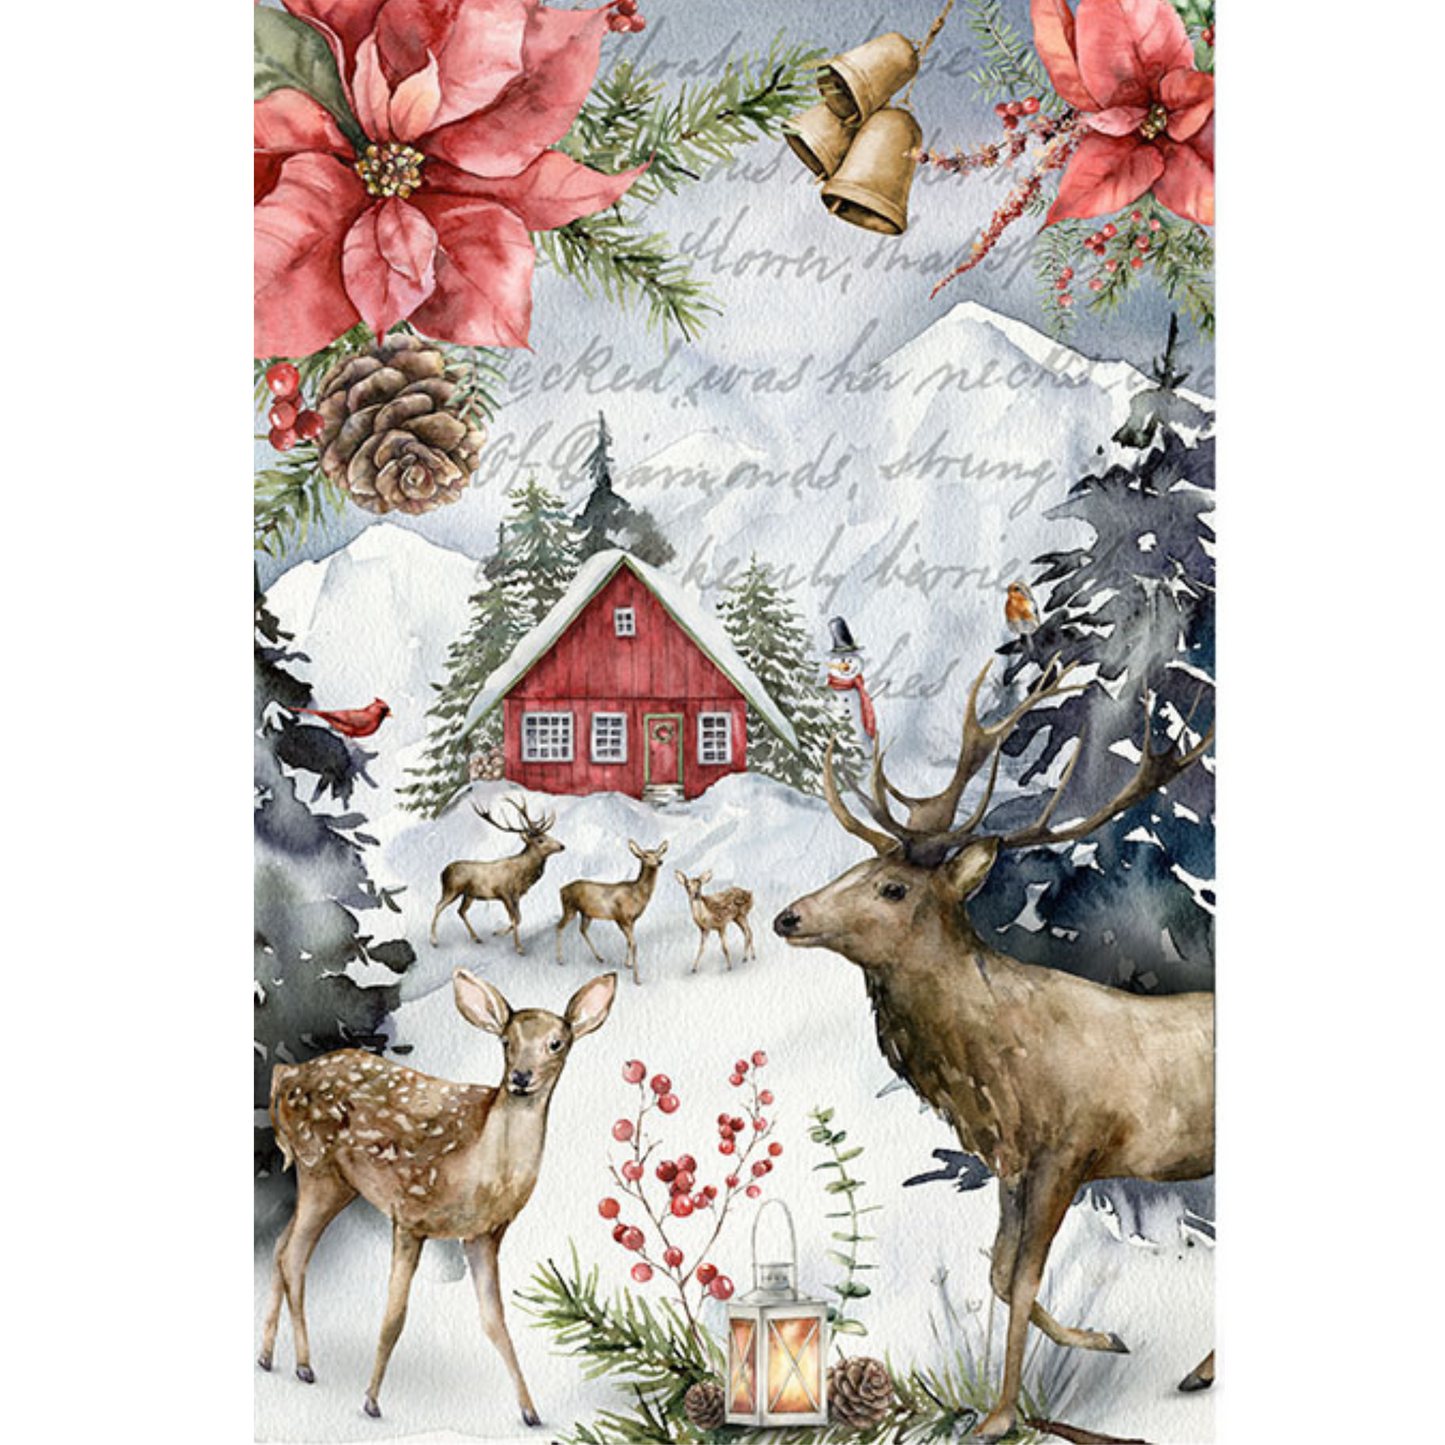 "Christmas 0326" Paper Designs Decoupage Rice Paper imported from Italy available at Milton's Daughter in Size A4 - 8.3" x 11.7"